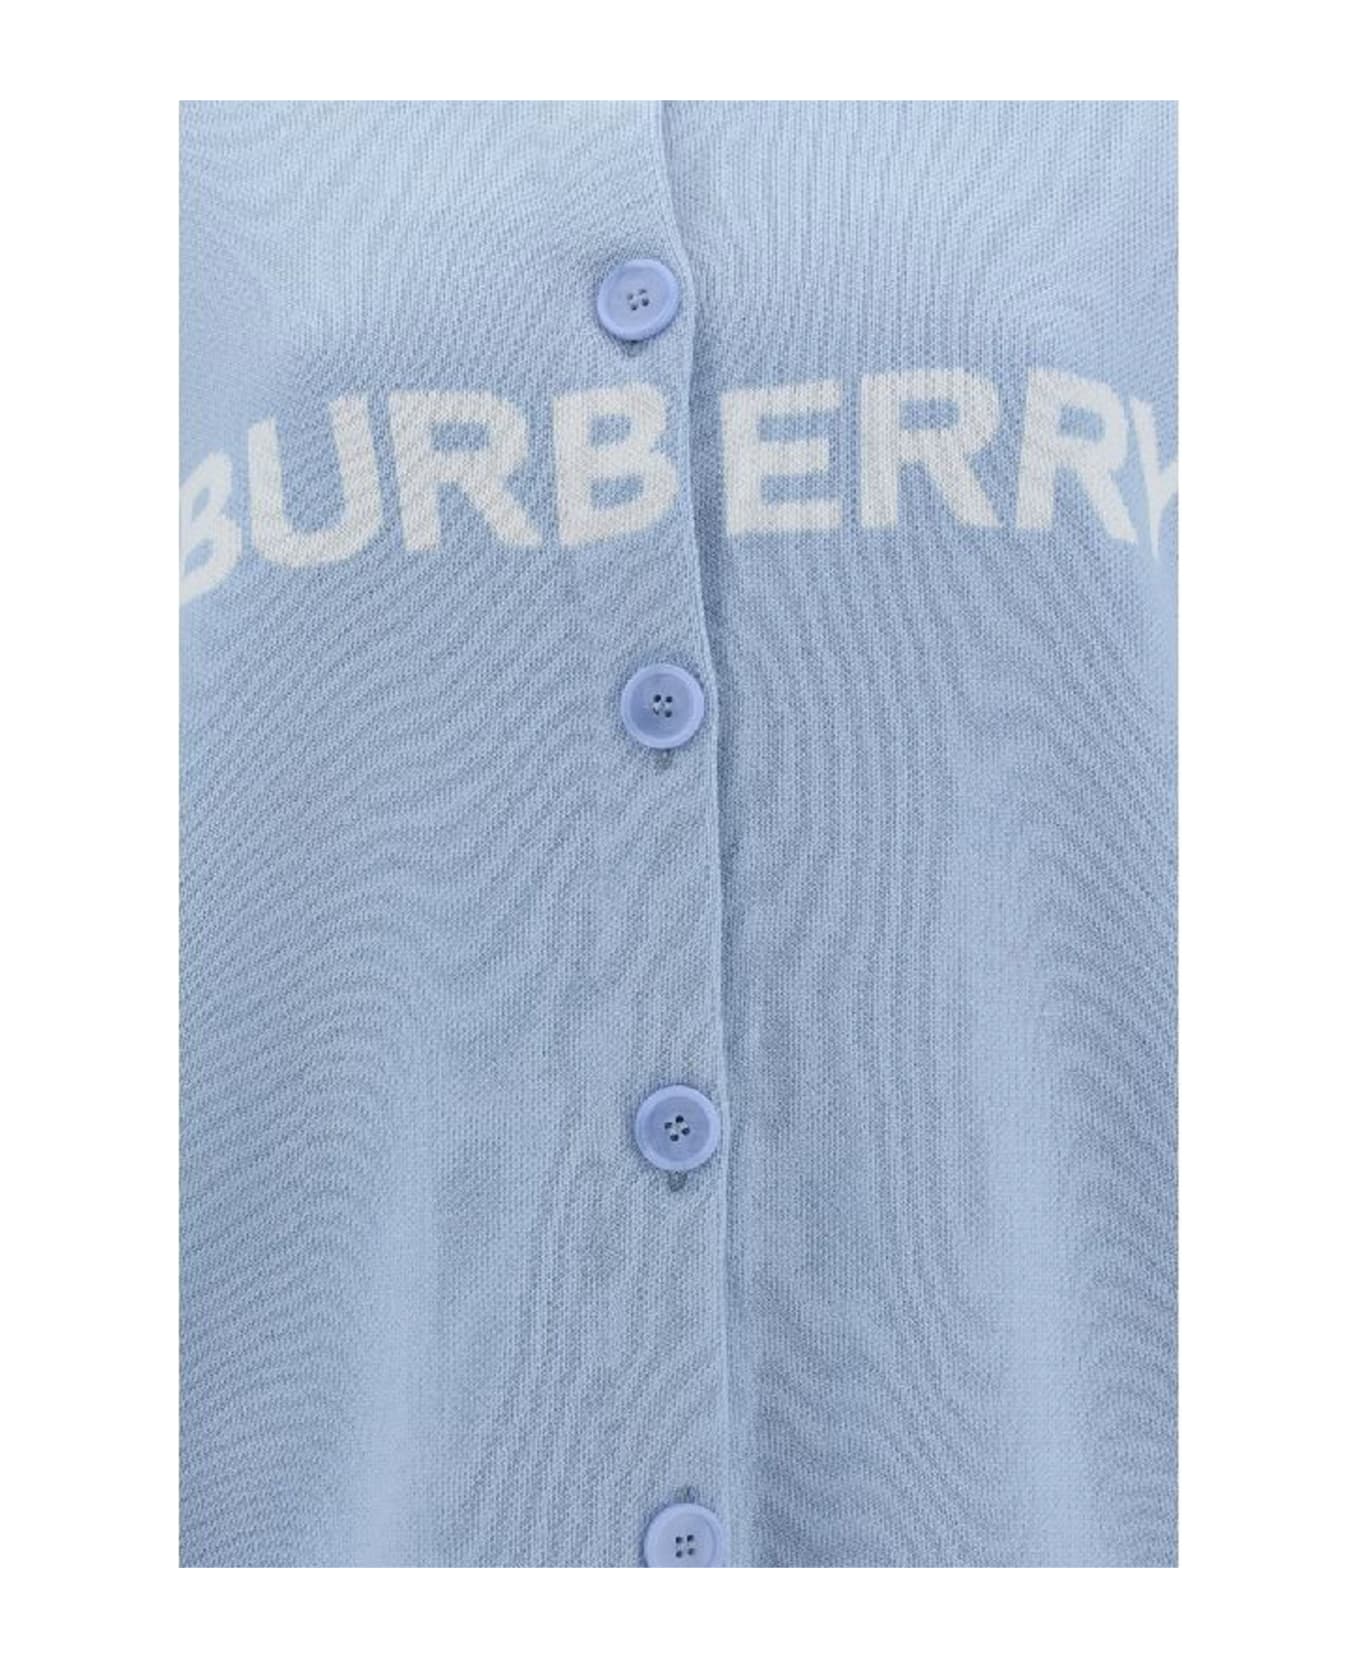 Burberry Cotton And Wool Cardigan - Blue